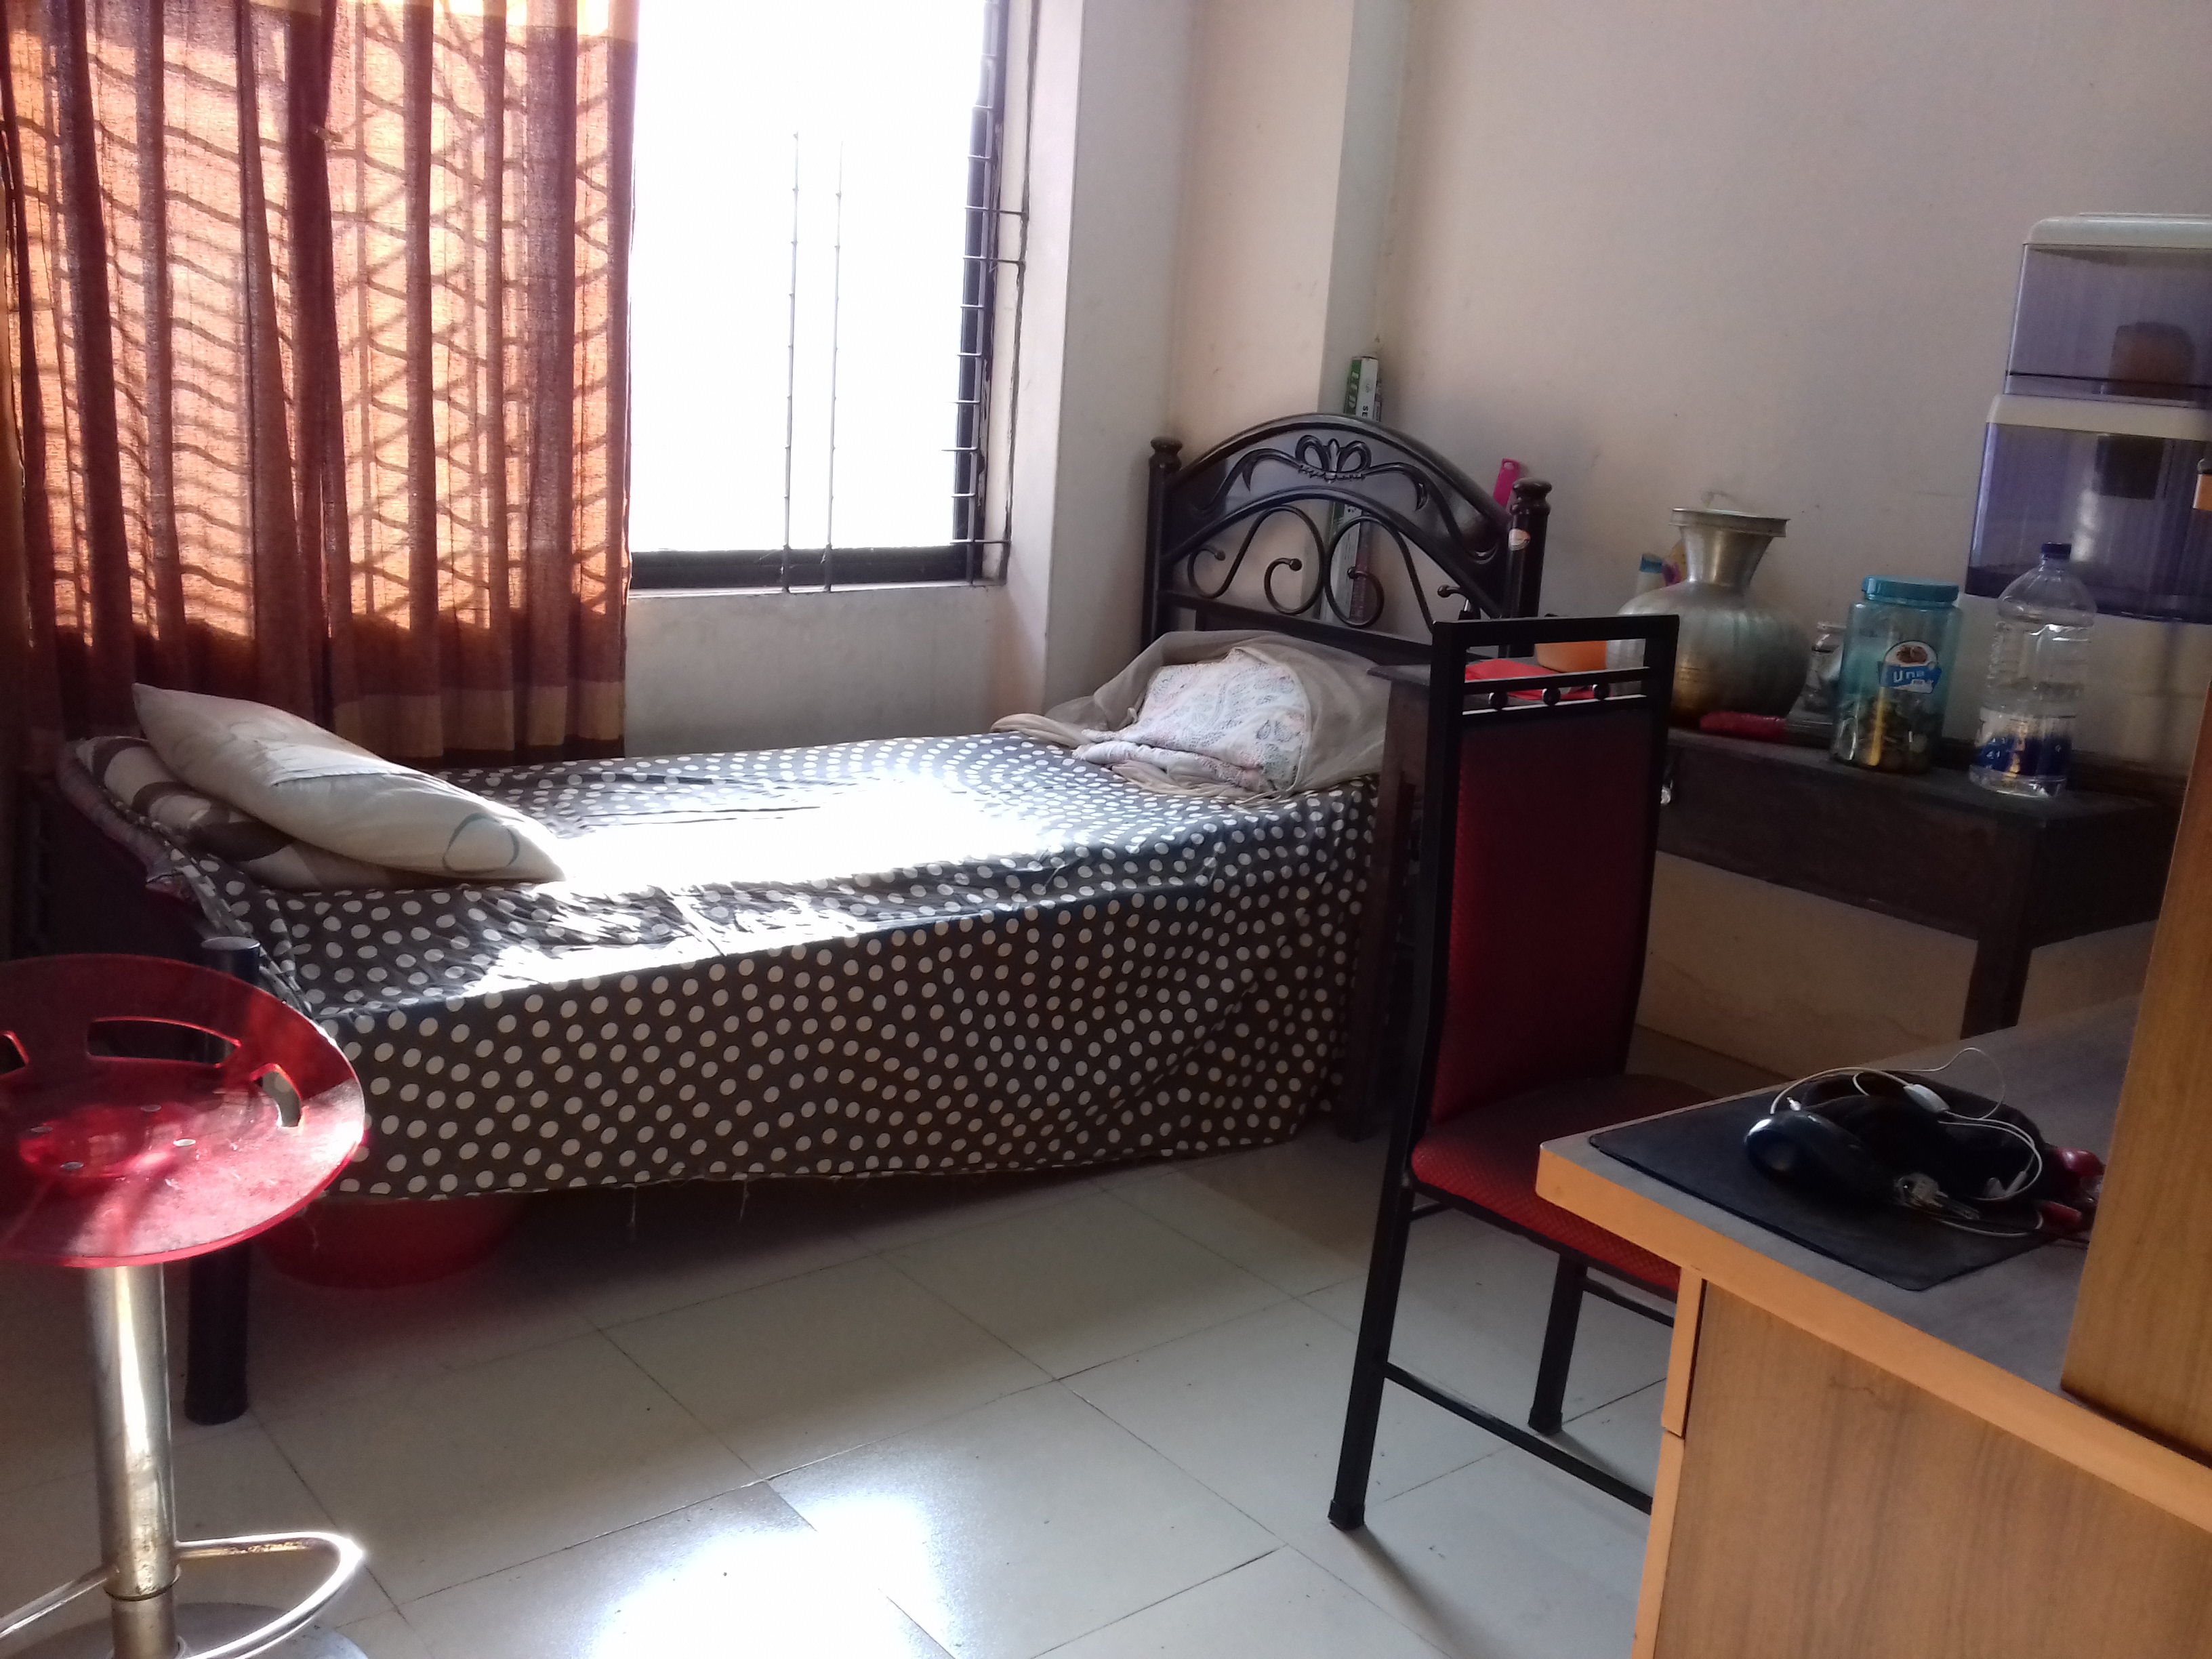 ONE ROOM AVAILABLE FROM MARCH 01, 2019